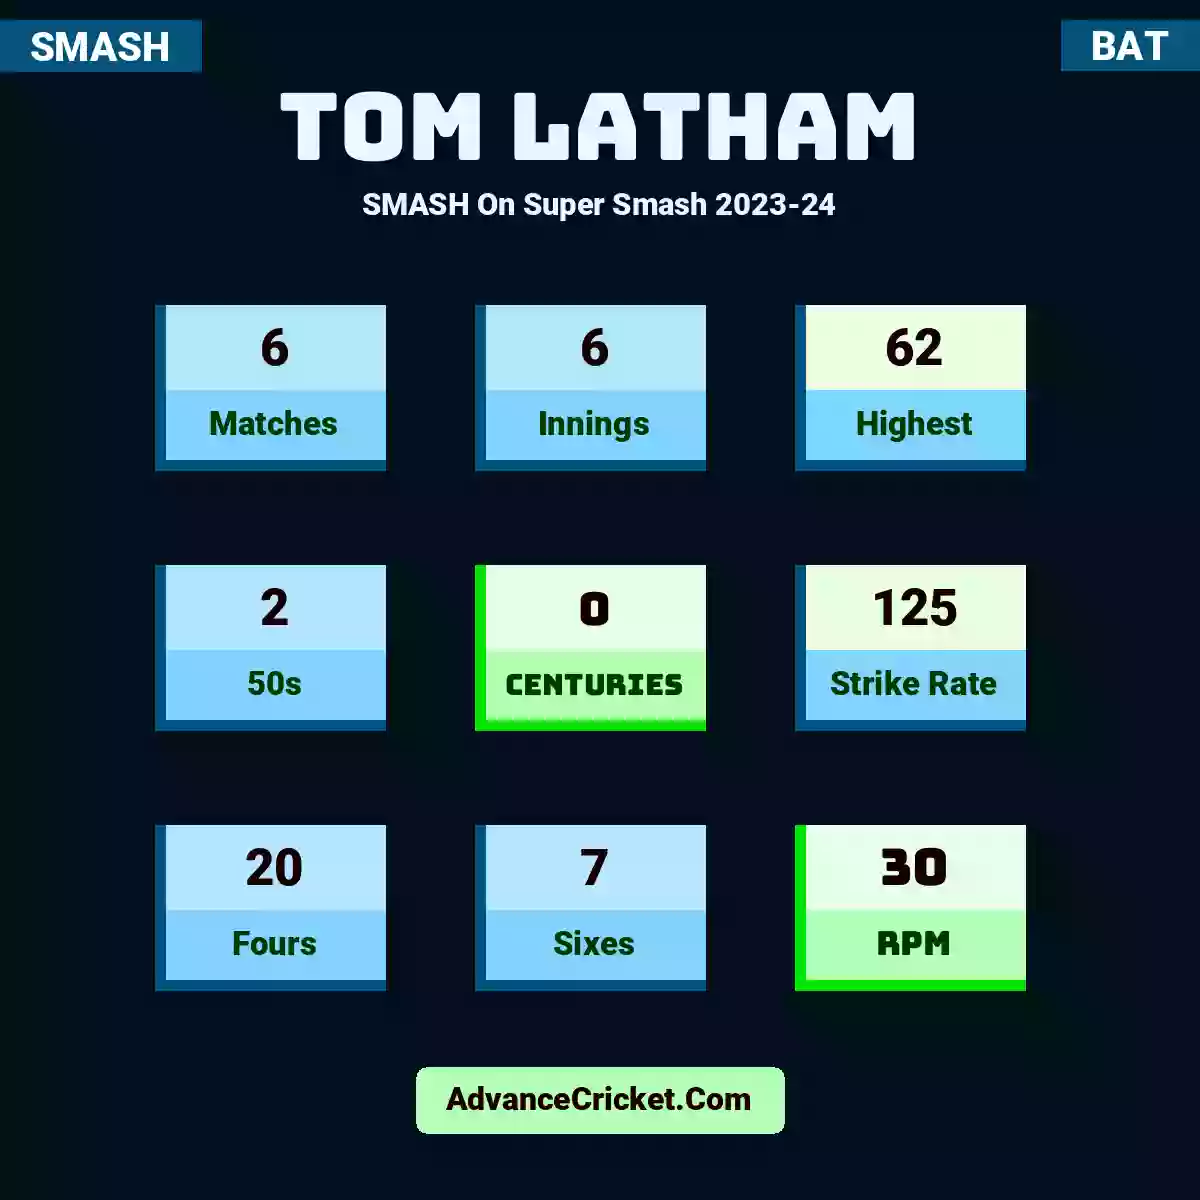 Tom Latham SMASH  On Super Smash 2023-24, Tom Latham played 6 matches, scored 62 runs as highest, 2 half-centuries, and 0 centuries, with a strike rate of 125. T.Latham hit 20 fours and 7 sixes, with an RPM of 30.